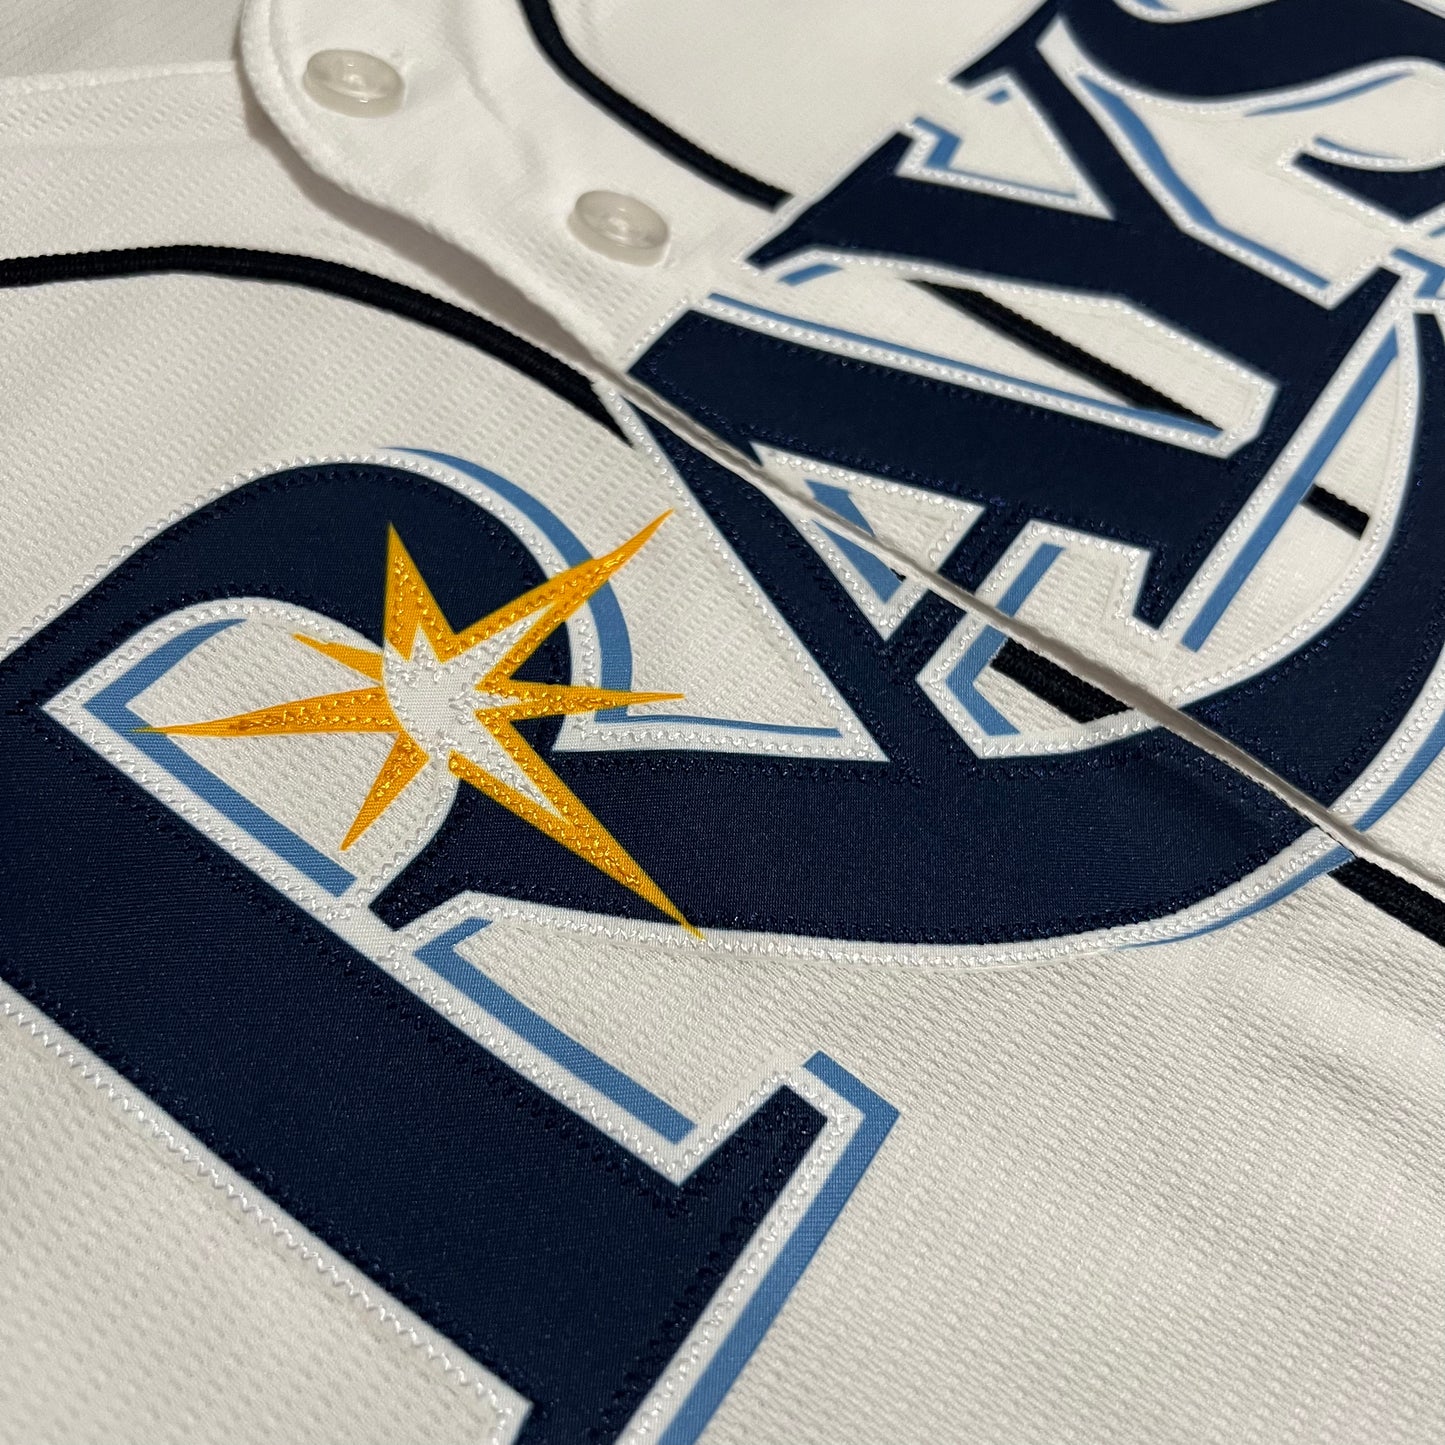 Tampa Bay Rays 2021 Home Nike Jersey - 2XL